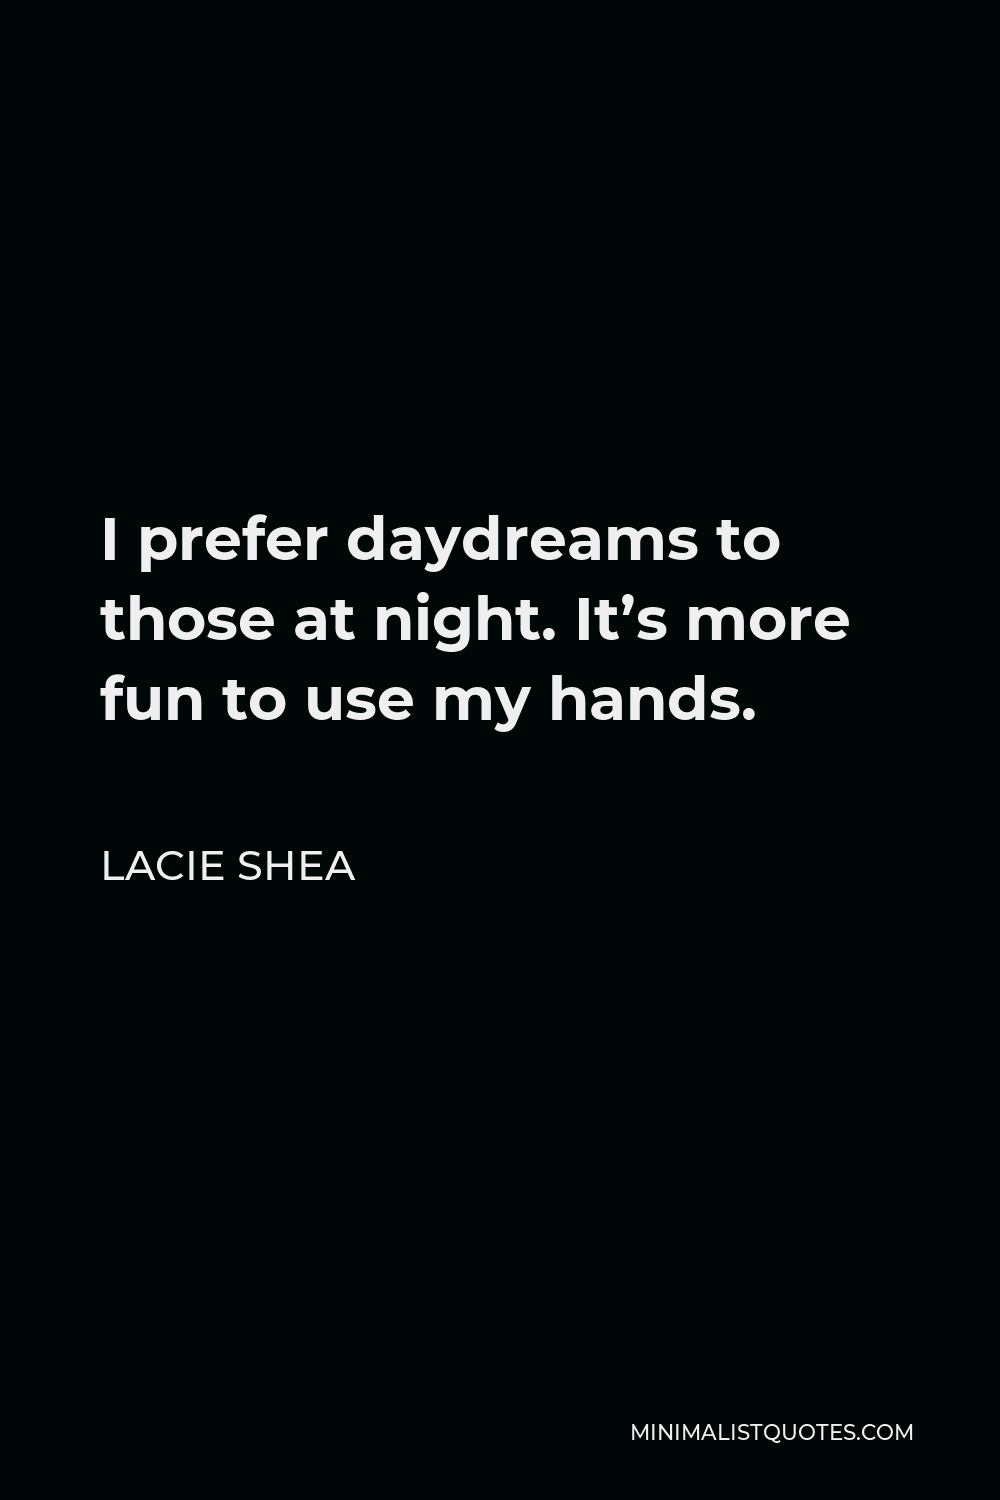 Lacie Shea Quote - I prefer daydreams to those at night. It’s more fun to use my hands.